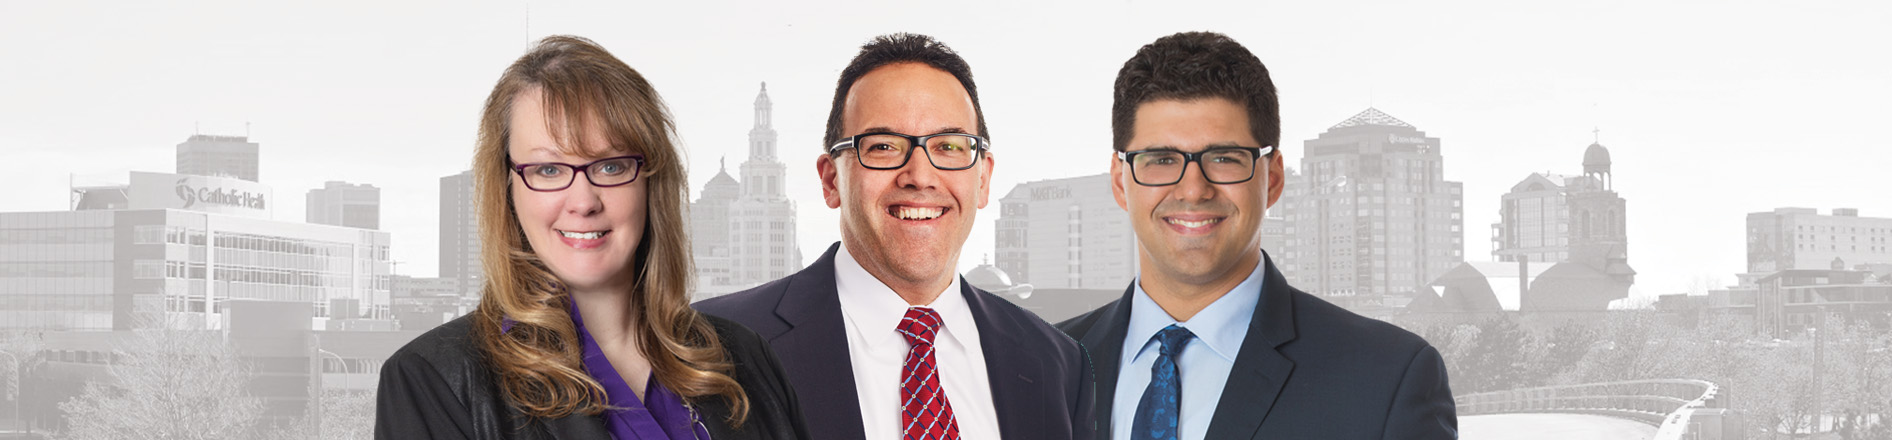 Banner photo of Buffalo NY skyline in background (grayscale) full color photo of Kelly Berg, Albert Nigro and Alexander Carruthers in front of the city skyline.